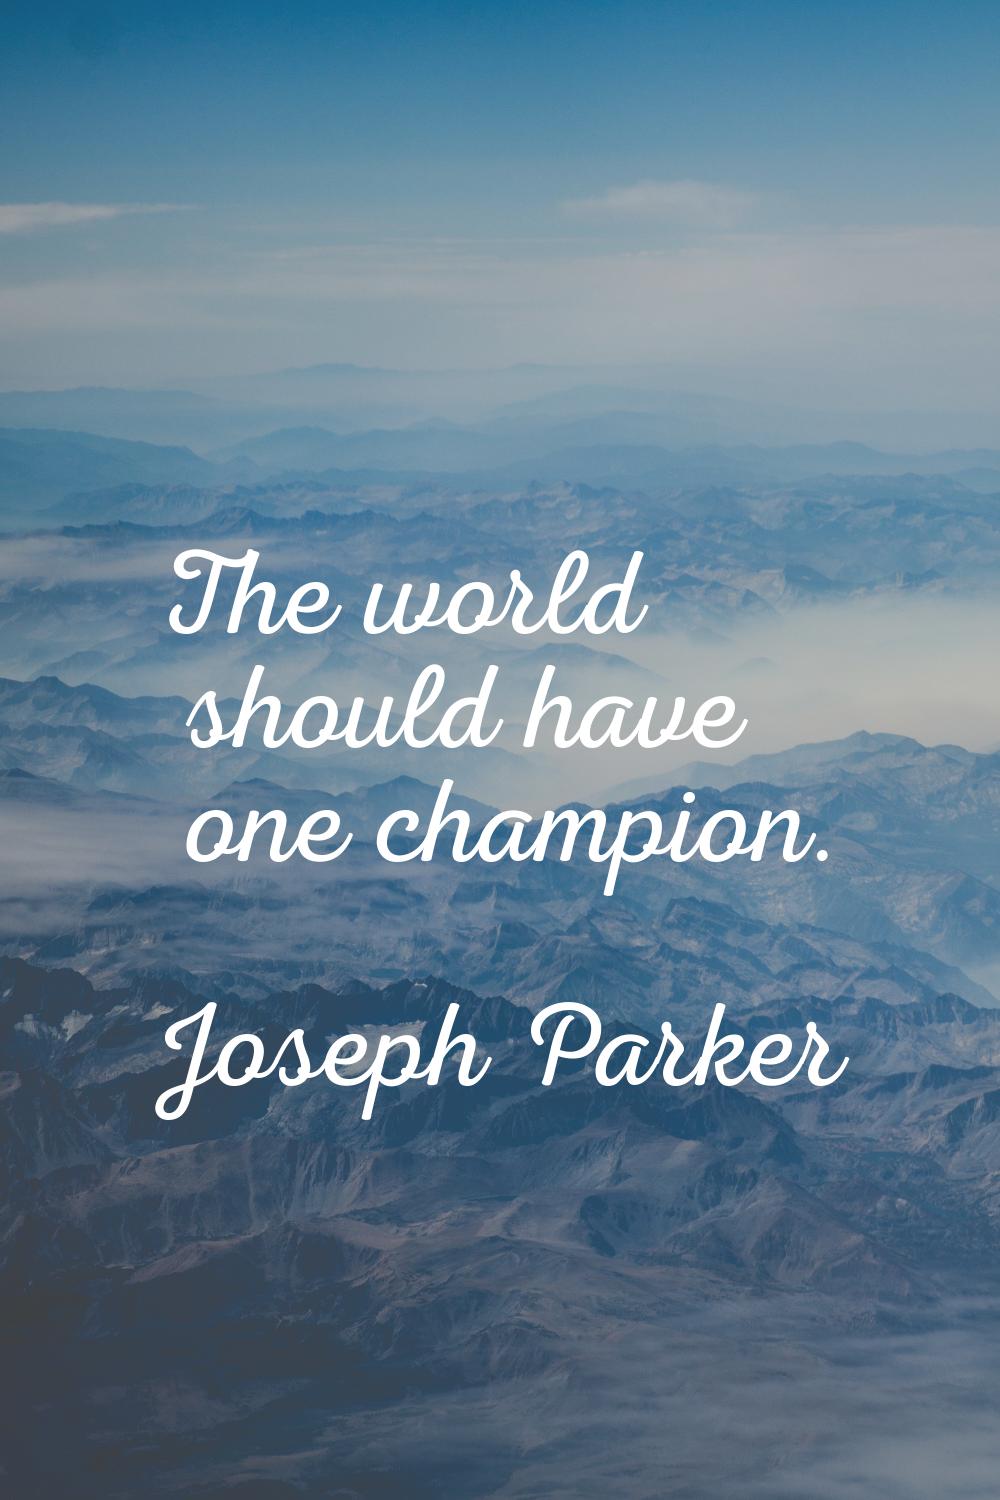 The world should have one champion.